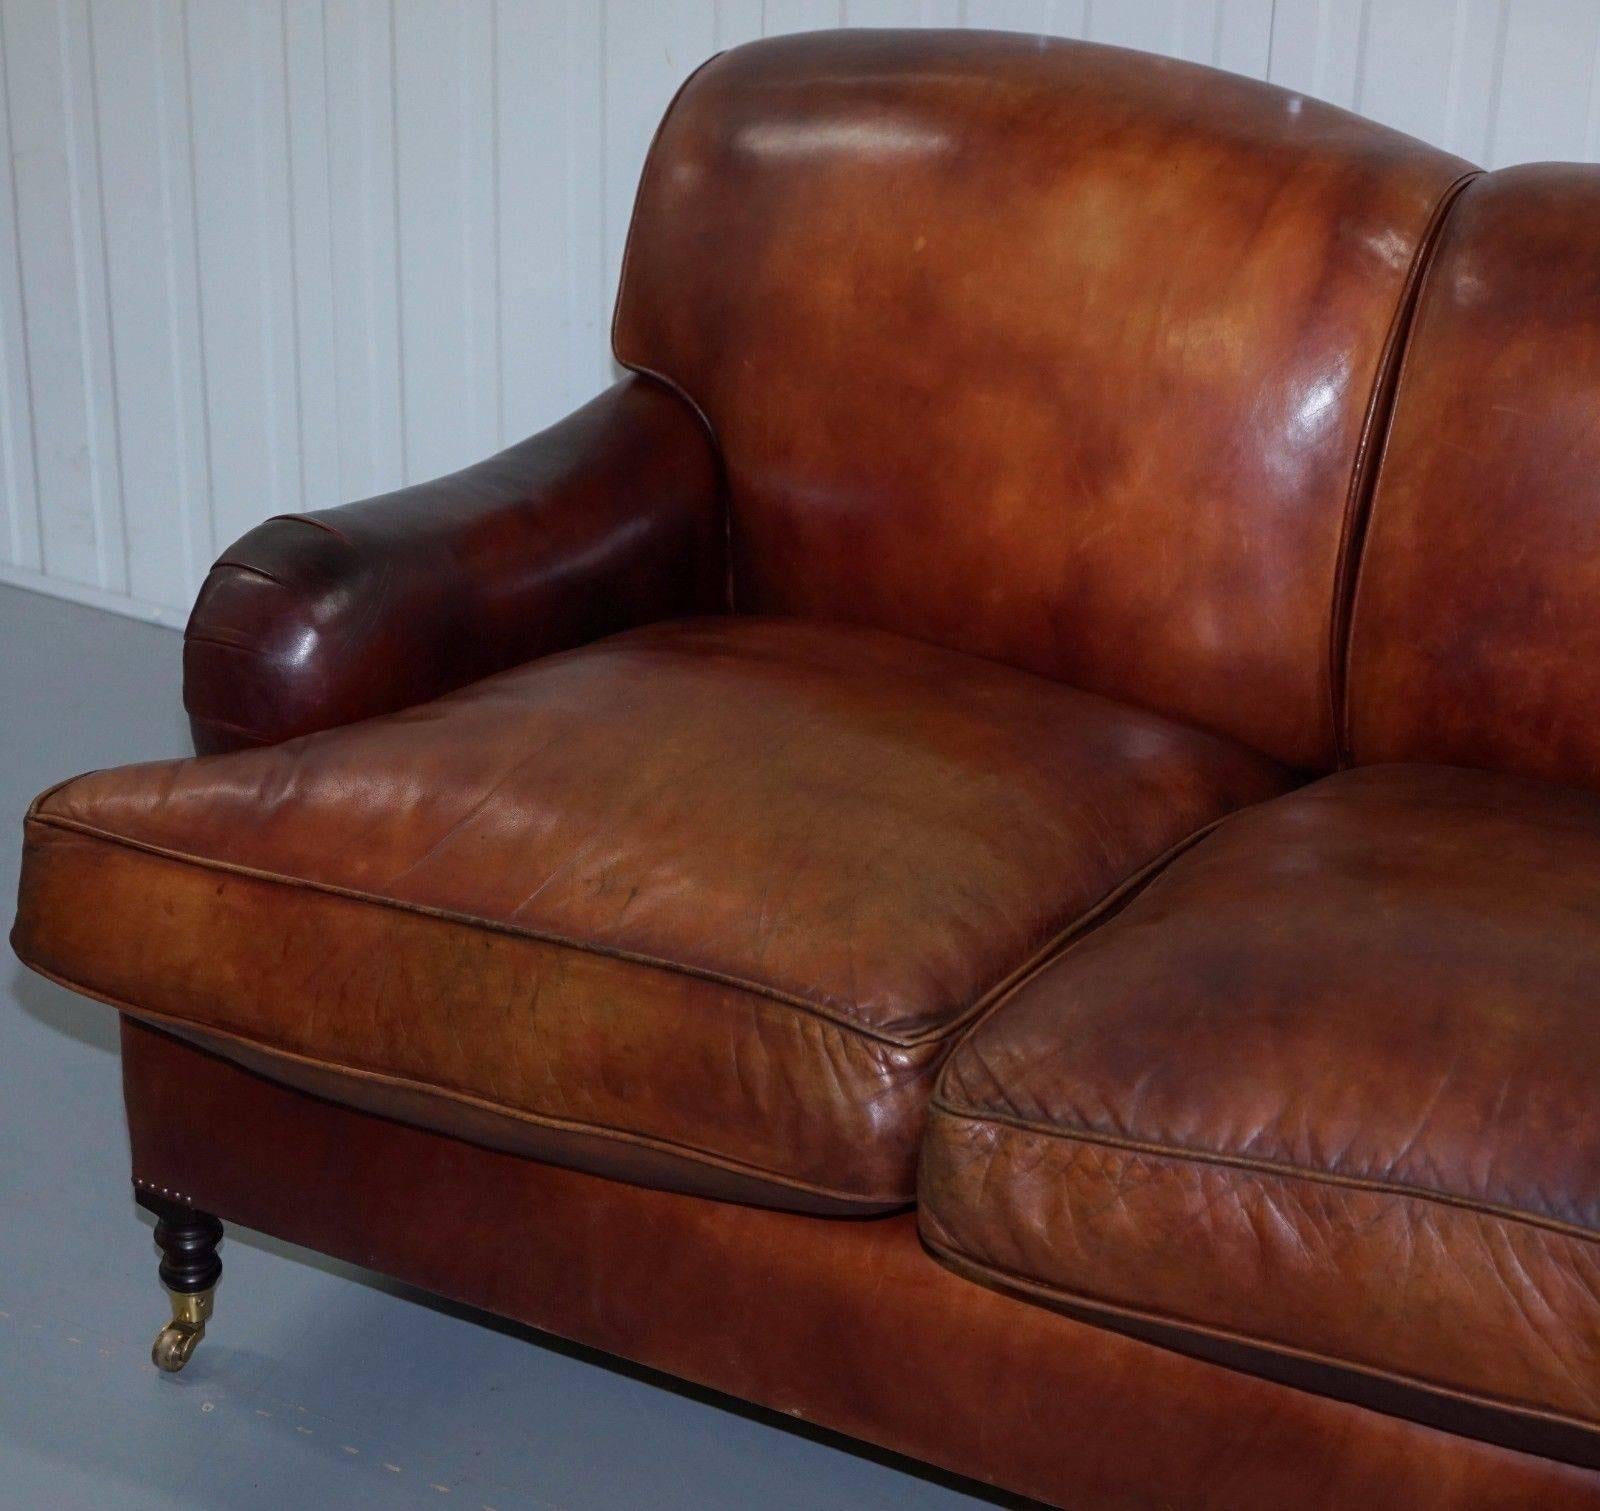 Hand-Carved George Smith Signature Howard & Son's Style Sofa Hand-Dyed Brown Leather